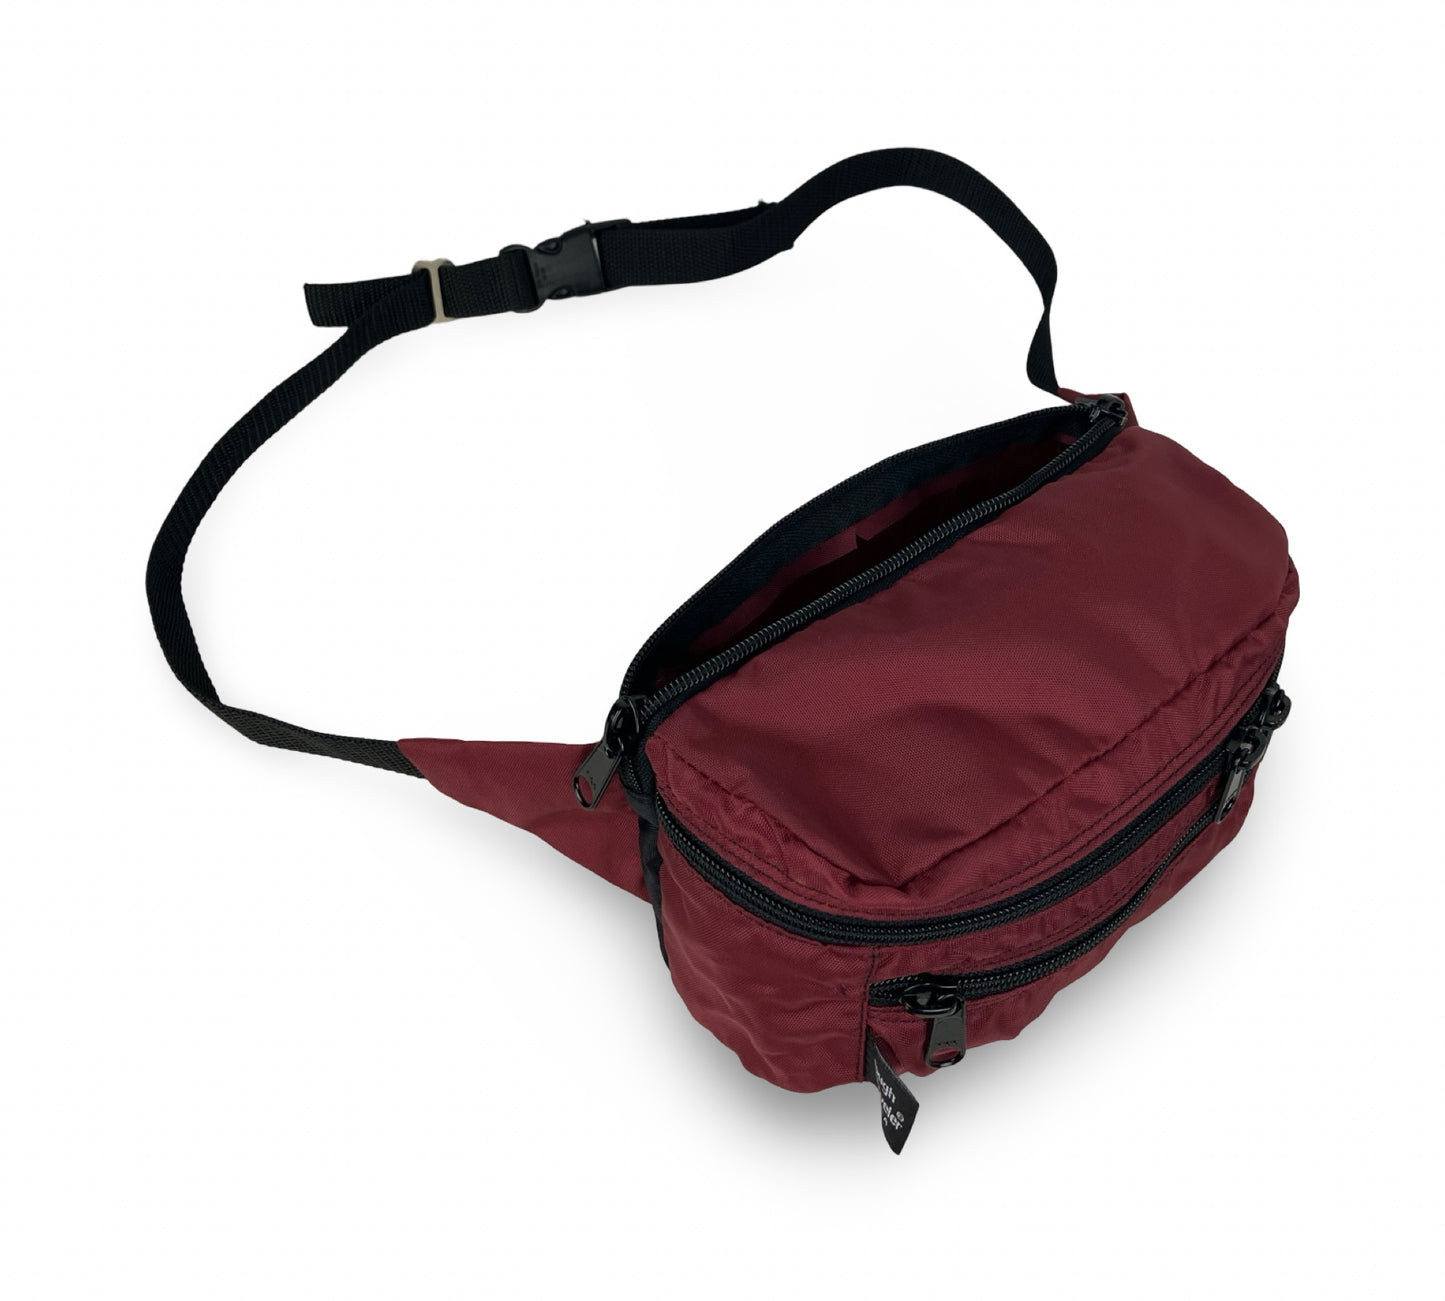 HIP PACK DELUXE Cross-Body & Fanny Packs, by Tough Traveler. Made in USA since 1970